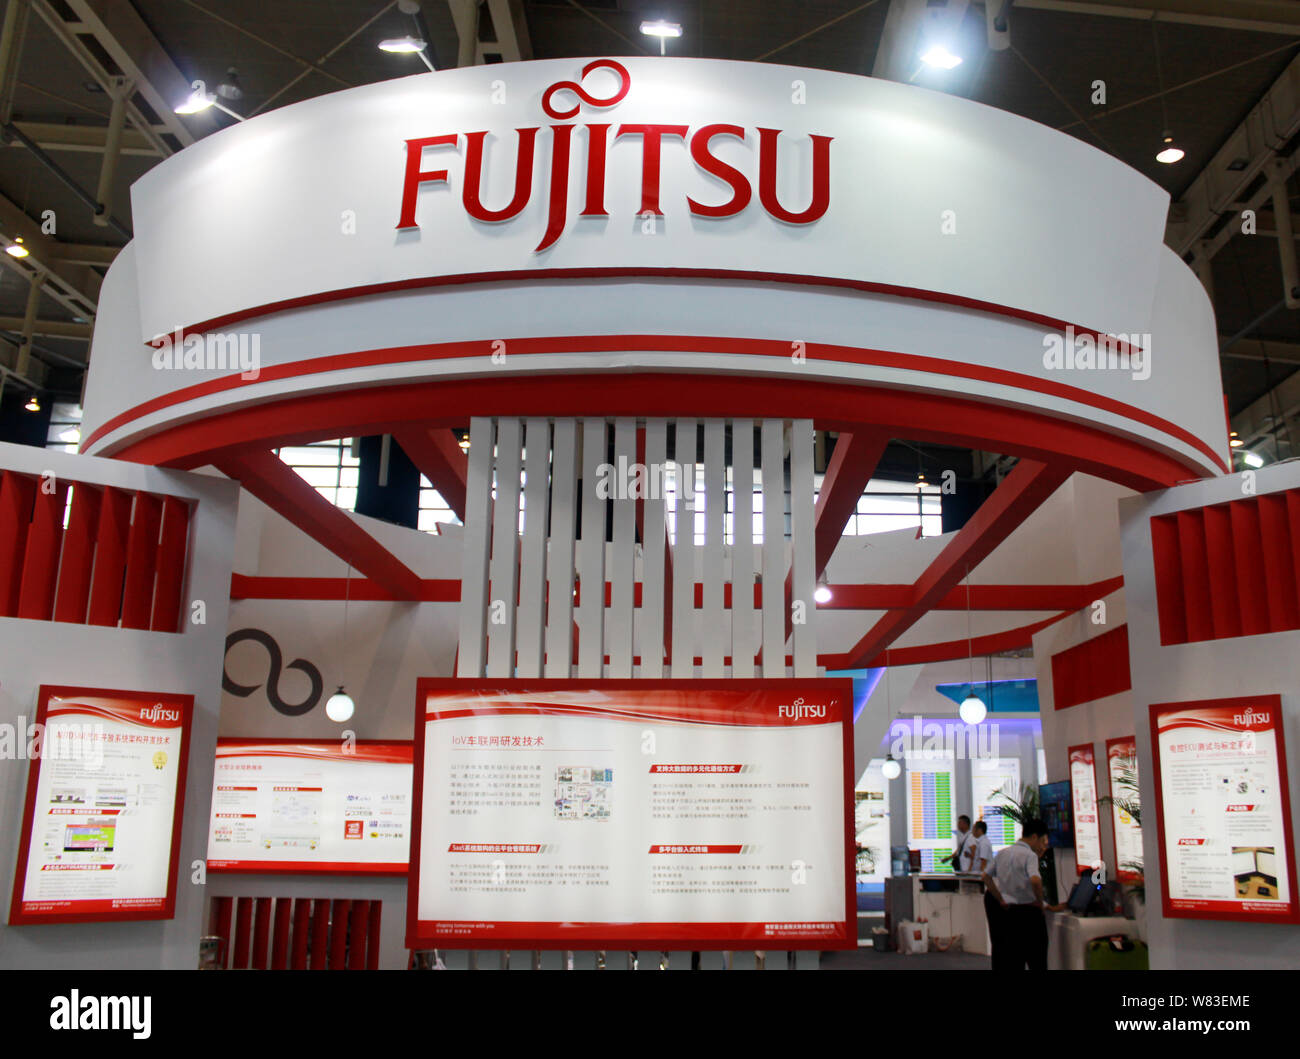 --FILE--People visit the stand of Fujitsu during an exhibition in Nanjing city, east China's Jiangsu province, 2 September 2016.   Fujitsu's president Stock Photo